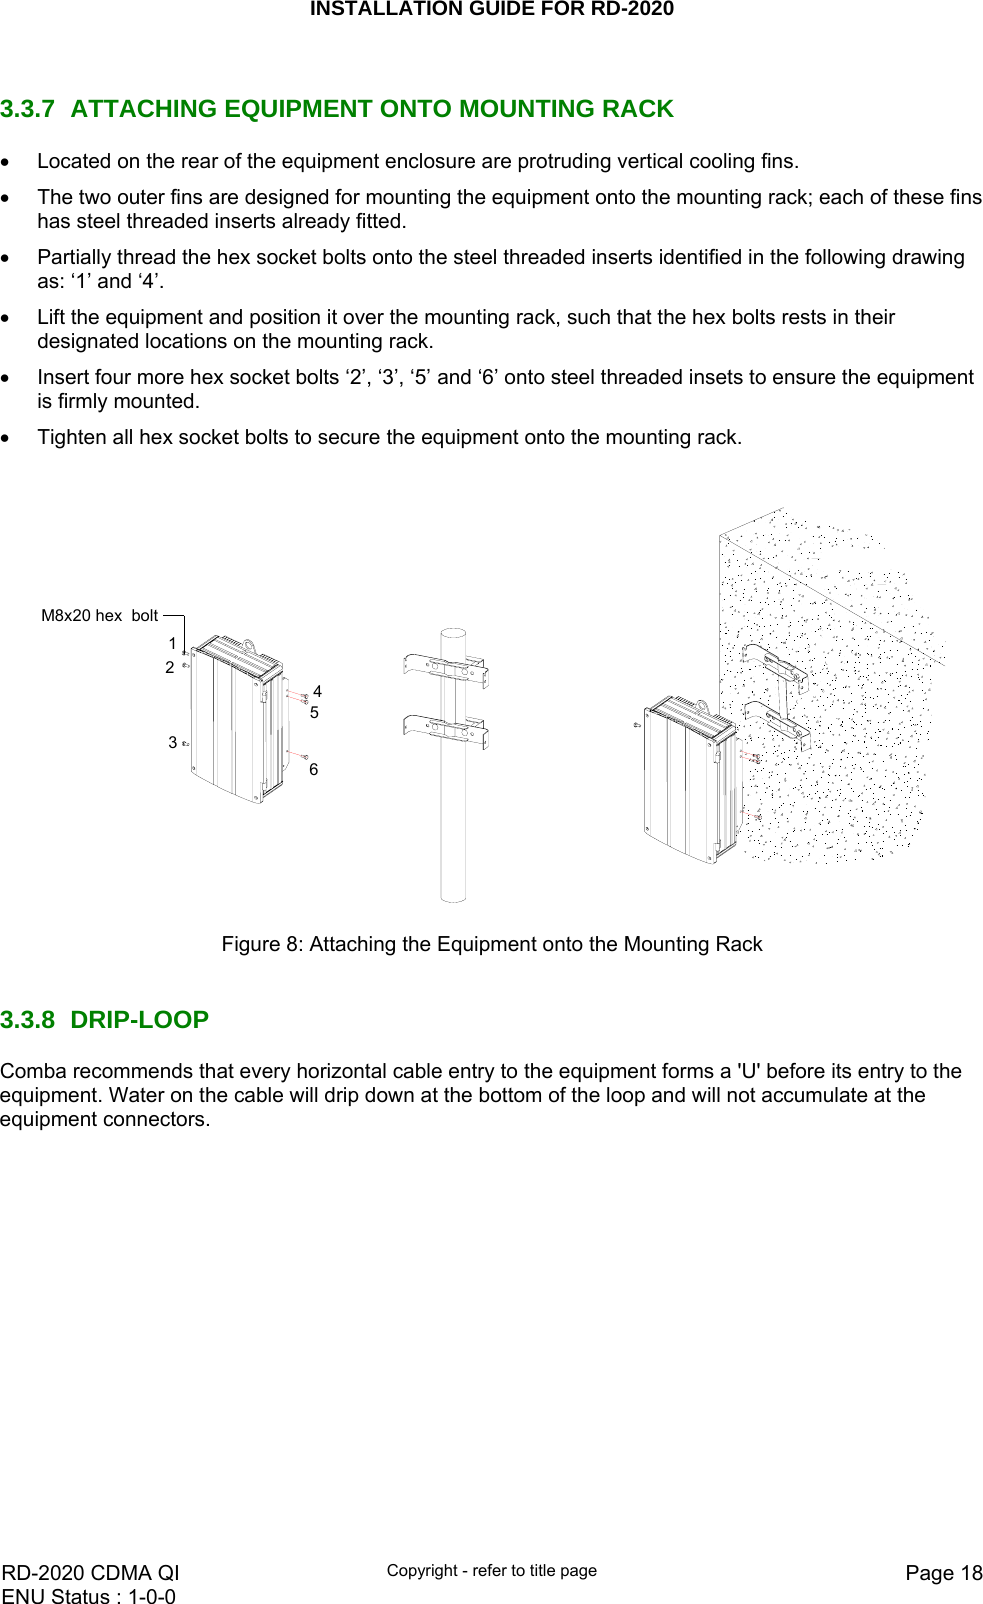 INSTALLATION GUIDE FOR RD-2020    RD-2020 CDMA QI  Copyright - refer to title page  Page 18ENU Status : 1-0-0     3.3.7 ATTACHING EQUIPMENT ONTO MOUNTING RACK •  Located on the rear of the equipment enclosure are protruding vertical cooling fins. •  The two outer fins are designed for mounting the equipment onto the mounting rack; each of these fins has steel threaded inserts already fitted. •  Partially thread the hex socket bolts onto the steel threaded inserts identified in the following drawing as: ‘1’ and ‘4’. •  Lift the equipment and position it over the mounting rack, such that the hex bolts rests in their designated locations on the mounting rack. •  Insert four more hex socket bolts ‘2’, ‘3’, ‘5’ and ‘6’ onto steel threaded insets to ensure the equipment is firmly mounted. •  Tighten all hex socket bolts to secure the equipment onto the mounting rack.  M8x20 hex  bolt321546 Figure 8: Attaching the Equipment onto the Mounting Rack    3.3.8 DRIP-LOOP Comba recommends that every horizontal cable entry to the equipment forms a &apos;U&apos; before its entry to the equipment. Water on the cable will drip down at the bottom of the loop and will not accumulate at the equipment connectors. 